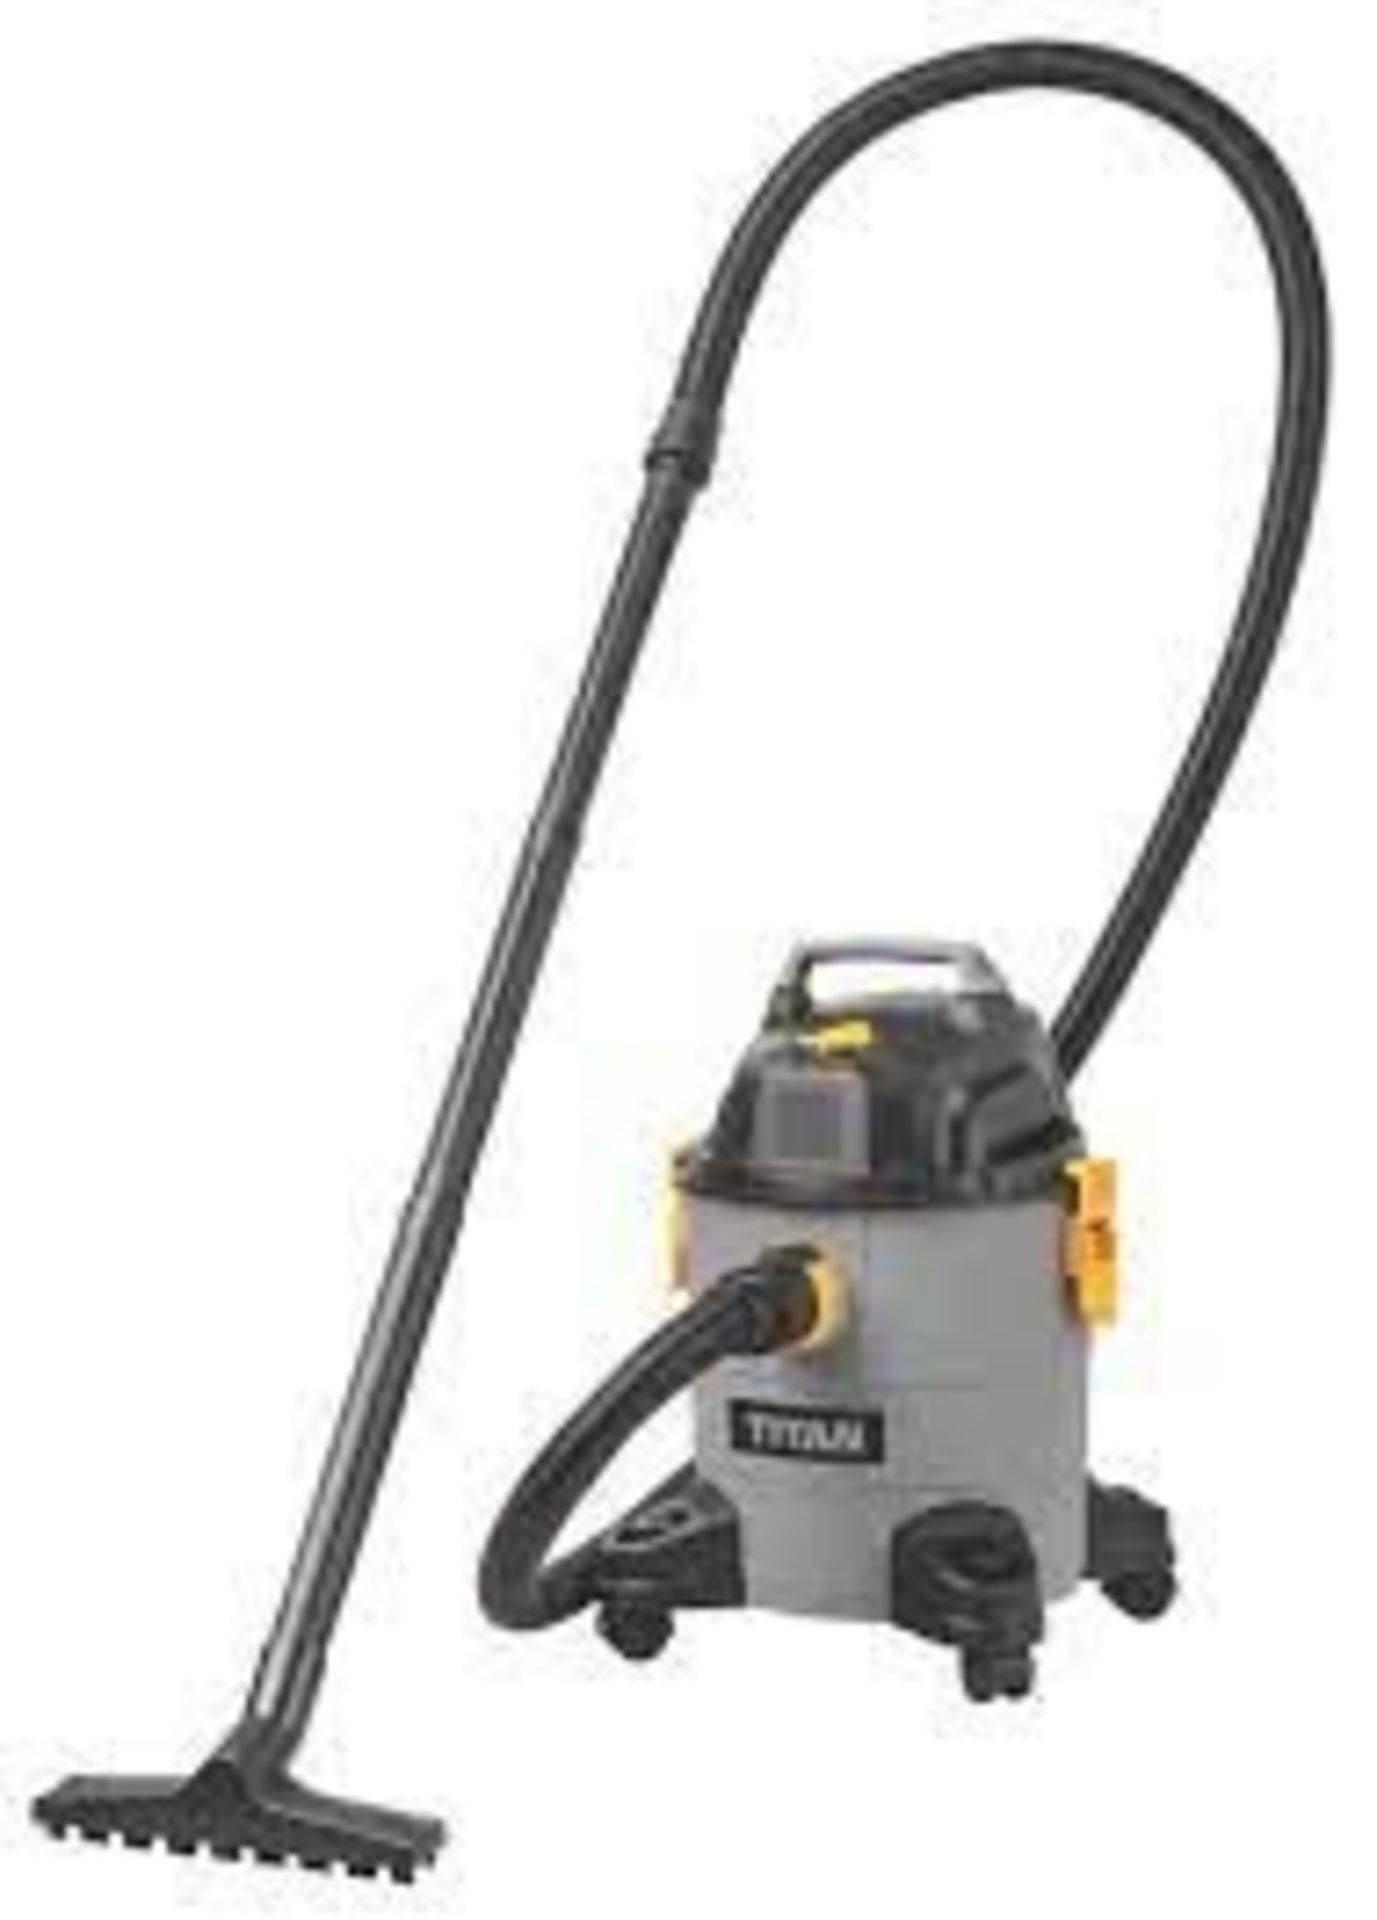 TITAN 1300W 16LTR WET & DRY VACUUM 220-240V. - R14.10. Lightweight vacuum ideal for cleaning up